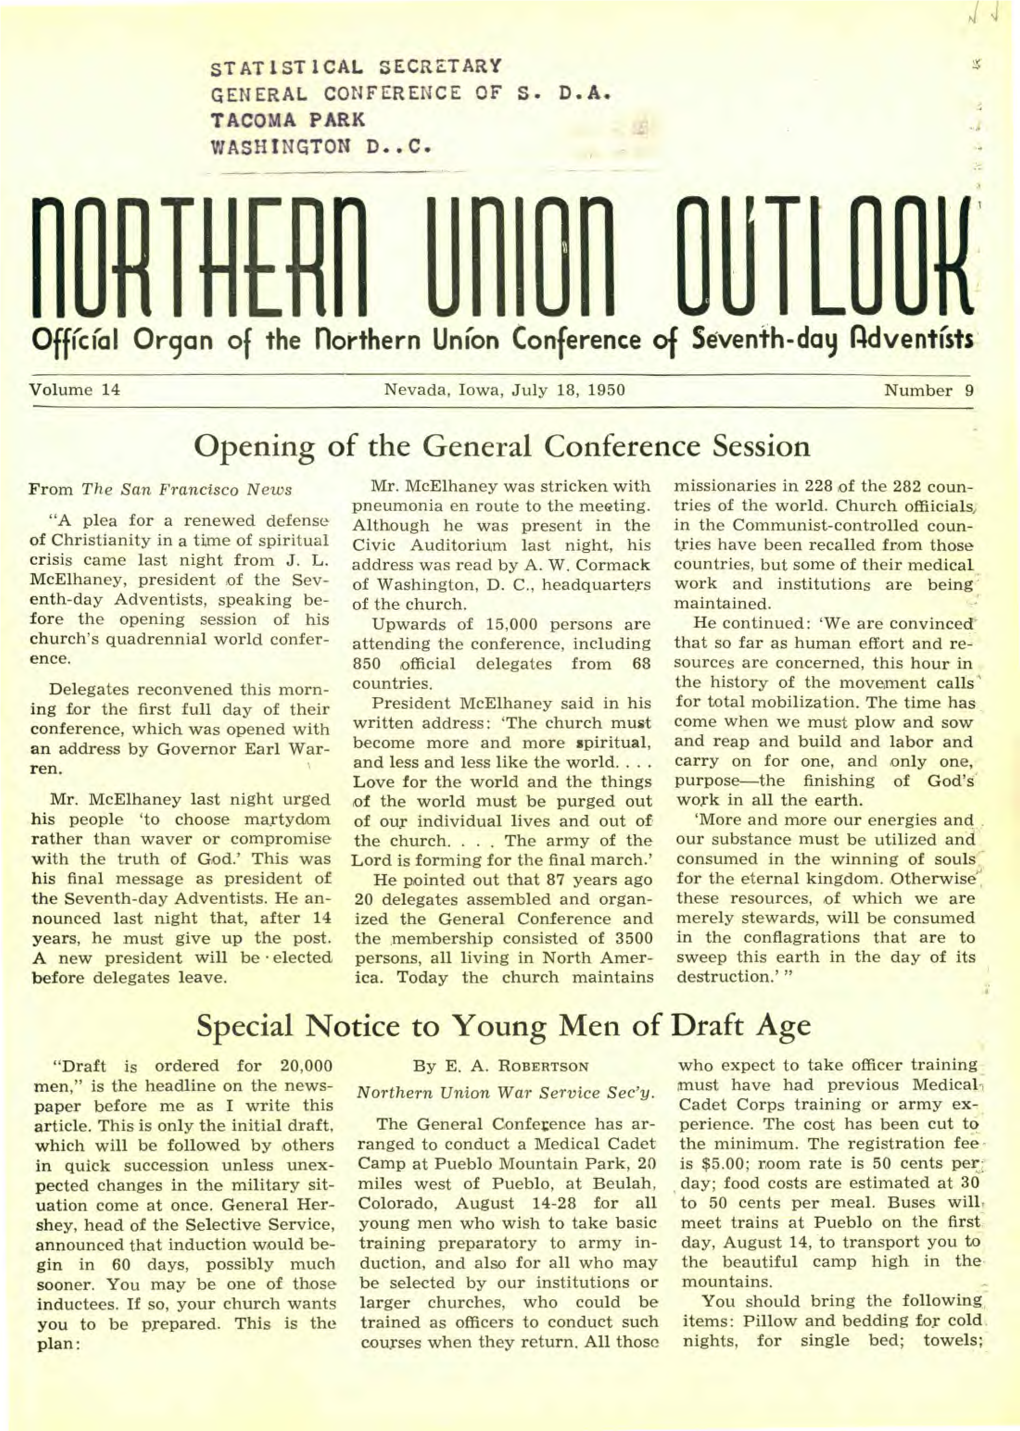 Opening of the General Conference Session Special Notice to Young